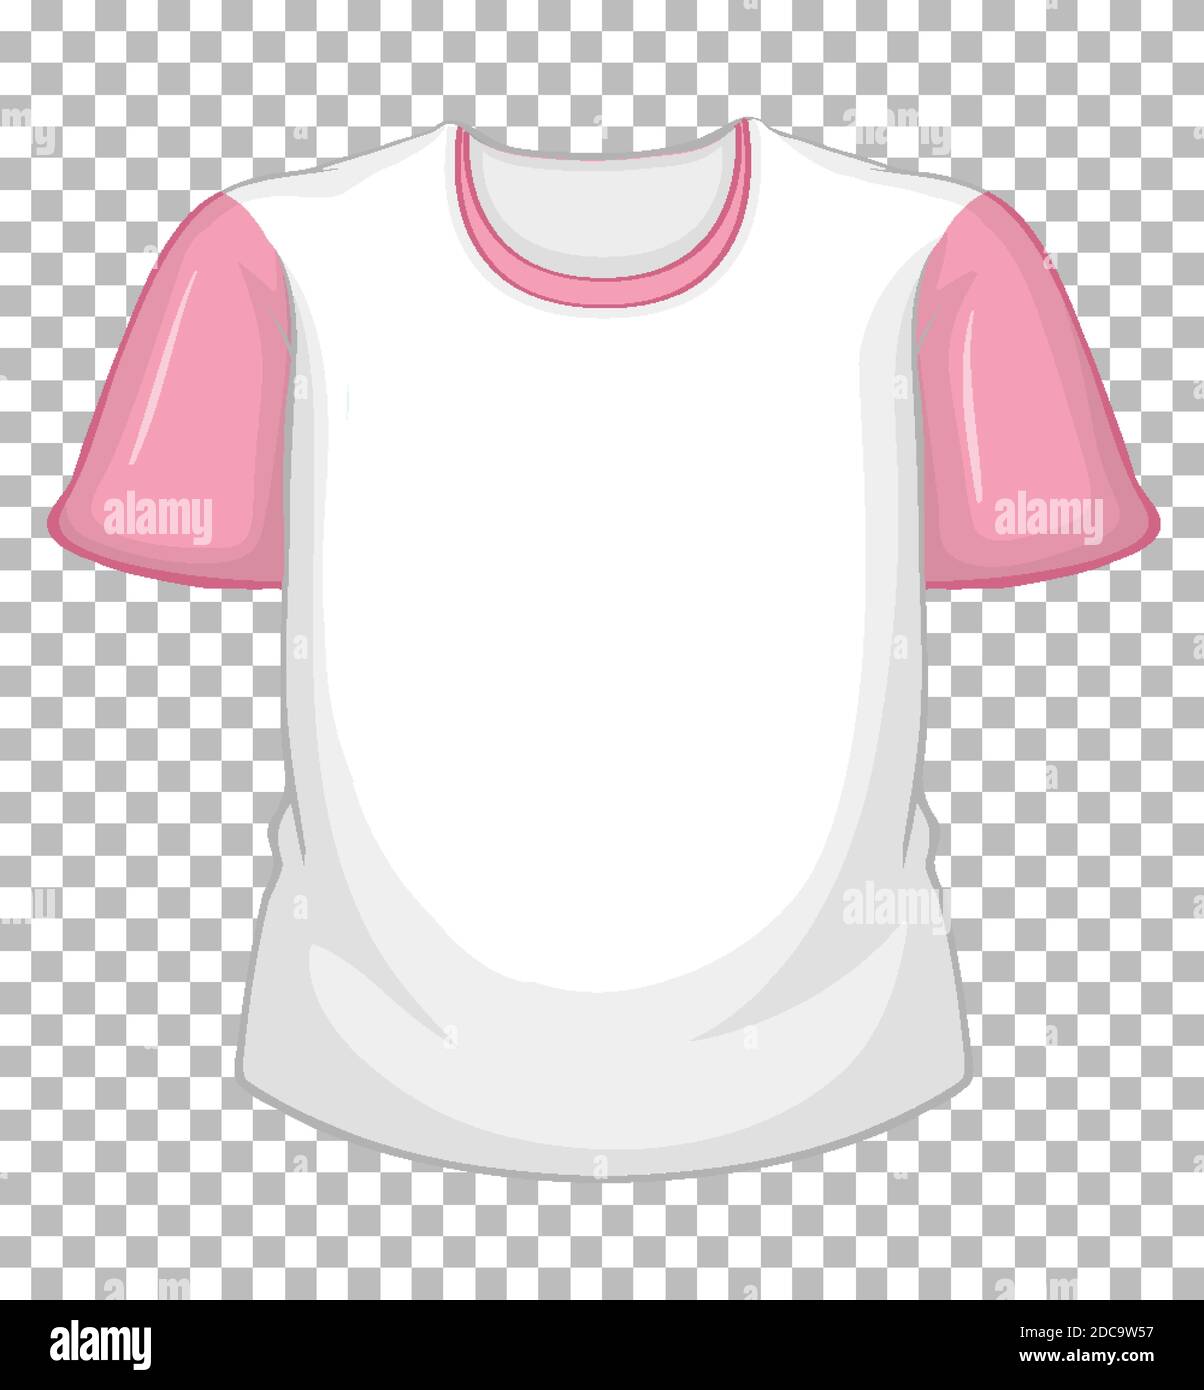 Blank white t-shirt with pink short sleeves on transparent